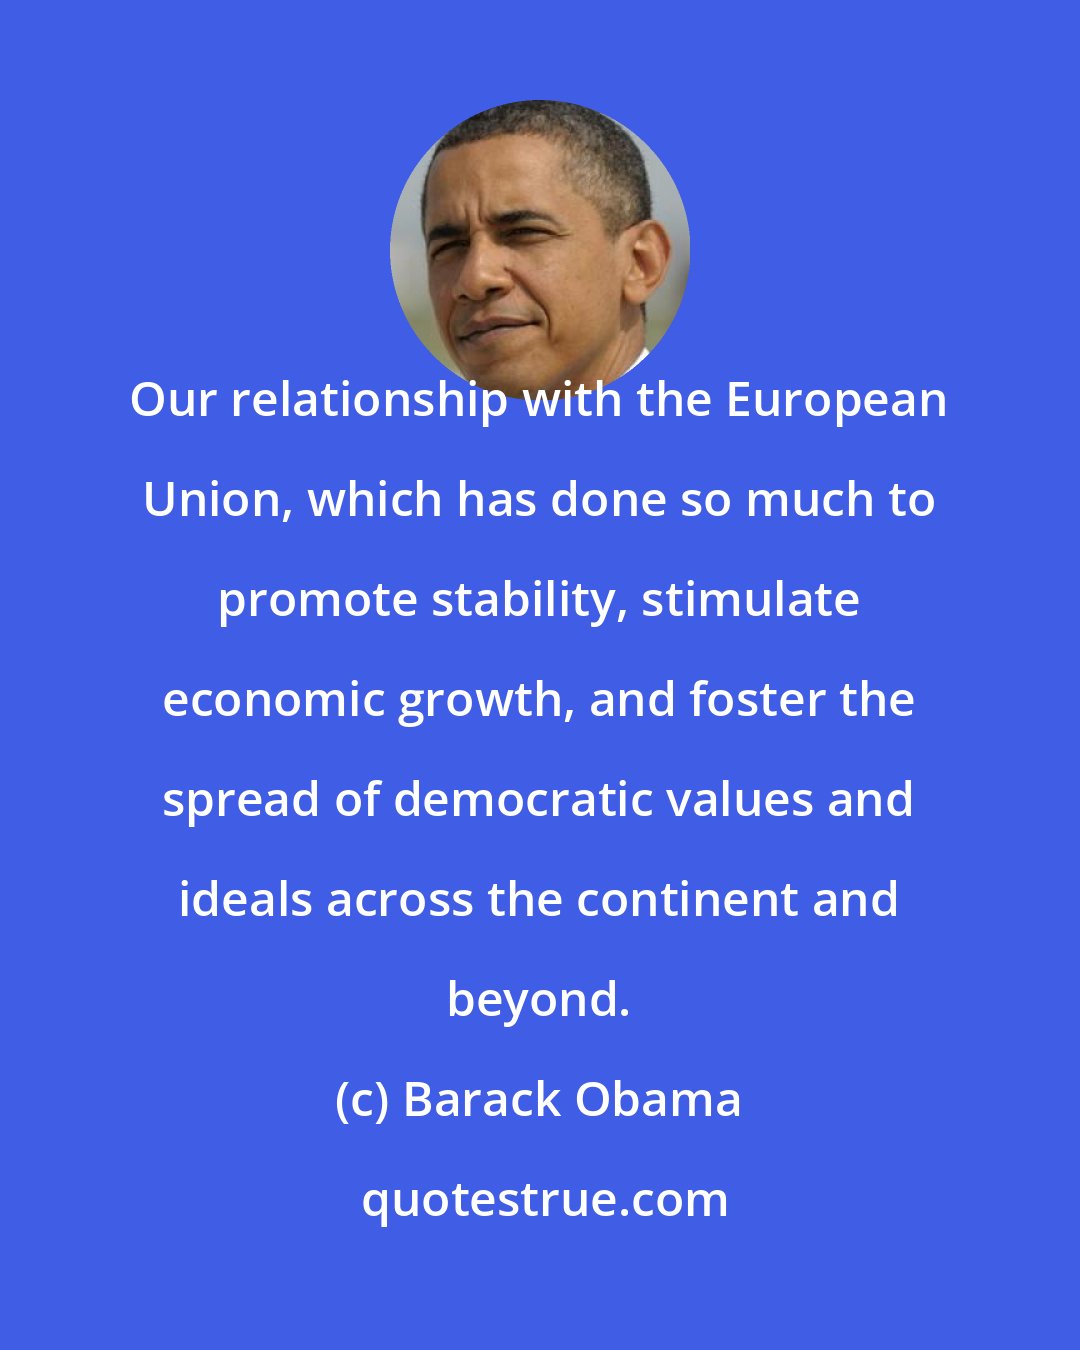 Barack Obama: Our relationship with the European Union, which has done so much to promote stability, stimulate economic growth, and foster the spread of democratic values and ideals across the continent and beyond.